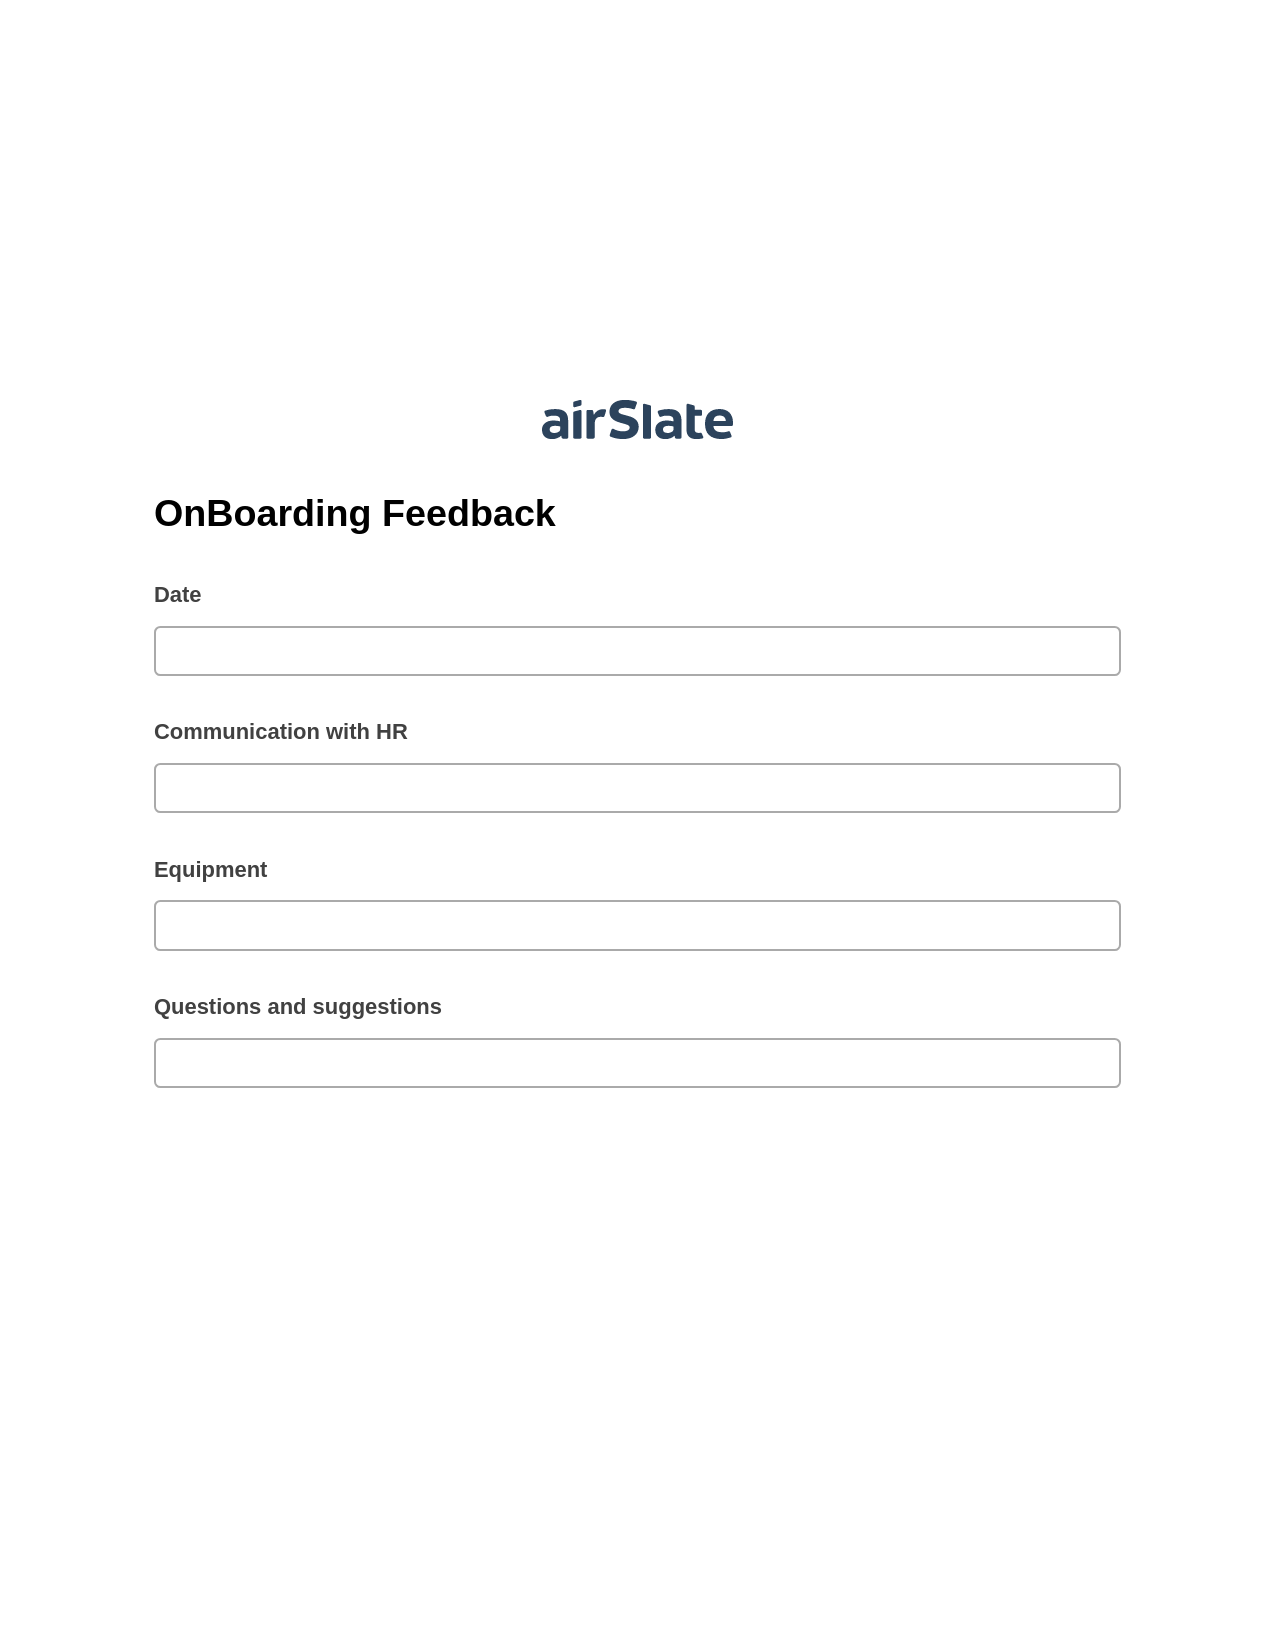 OnBoarding Feedback Pre-fill from CSV File Bot, Revoke Access Bot, Archive to SharePoint Folder Bot